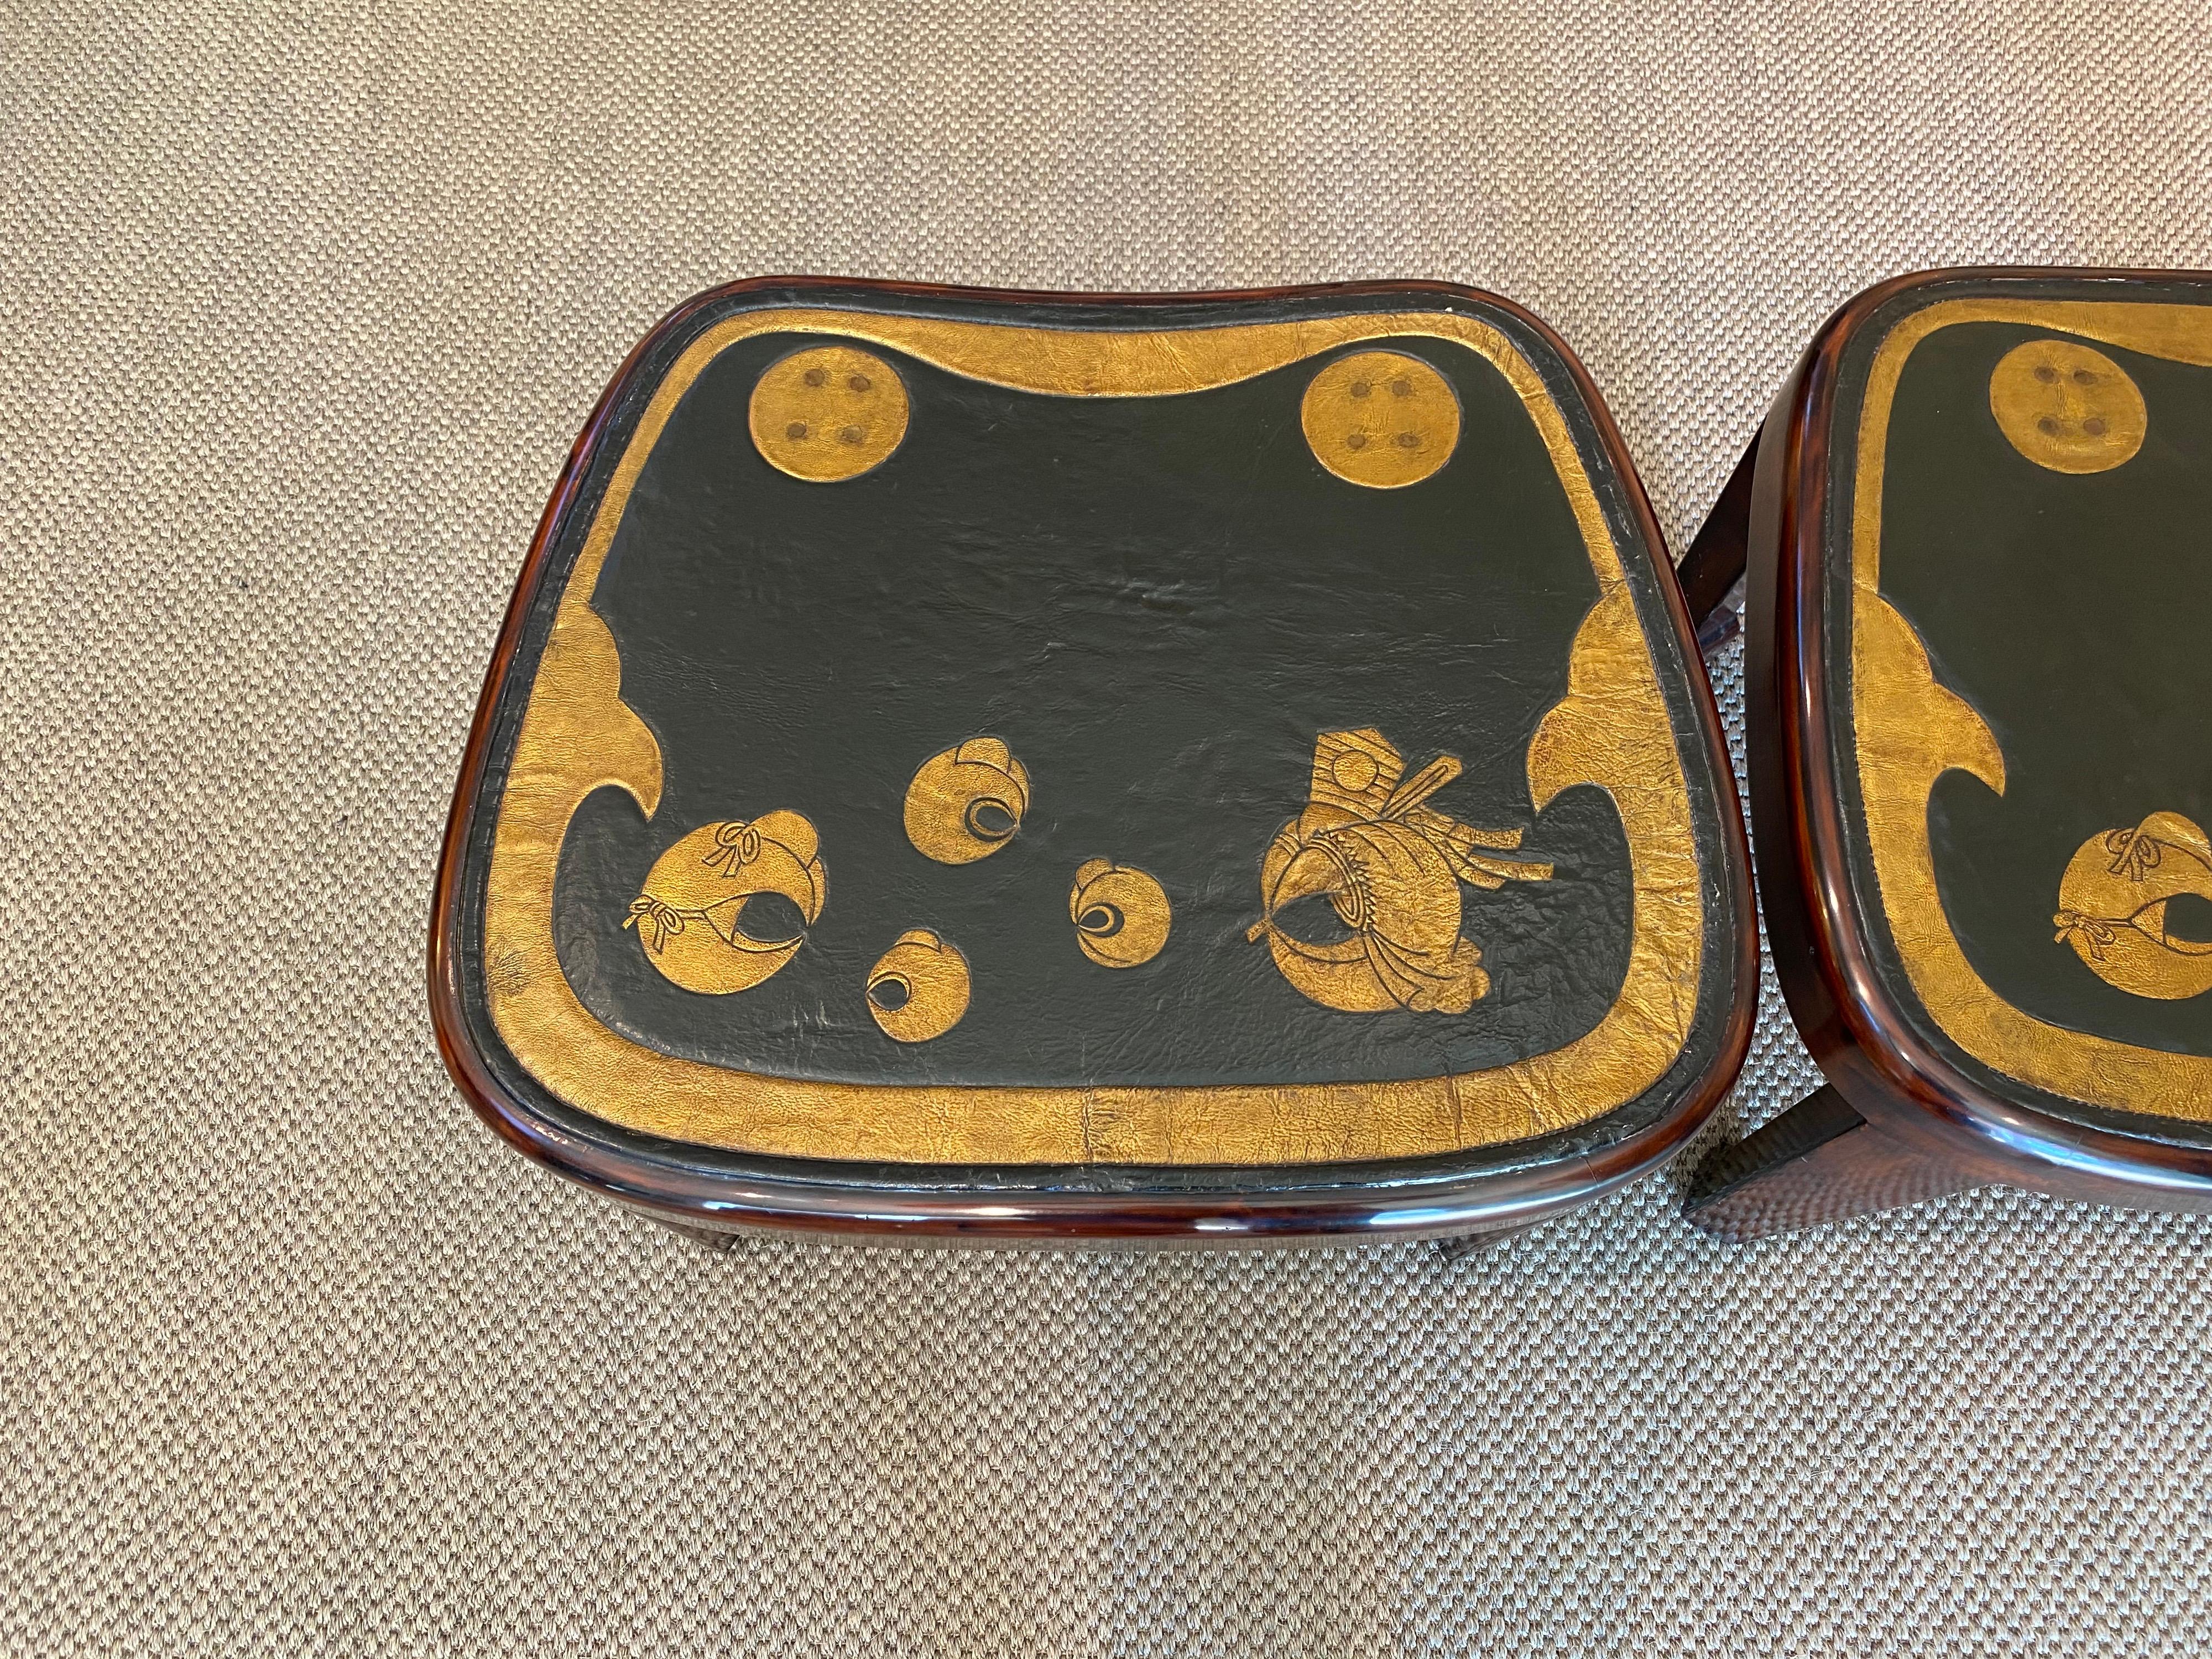 A pair of elegant and unusual side tables or coffee tables made by Gracie. 

The legs and apron were finished in cashew lacquer to fit the leather tops, which are antique pieces of leather. These leather pieces were part of a samurai's horse